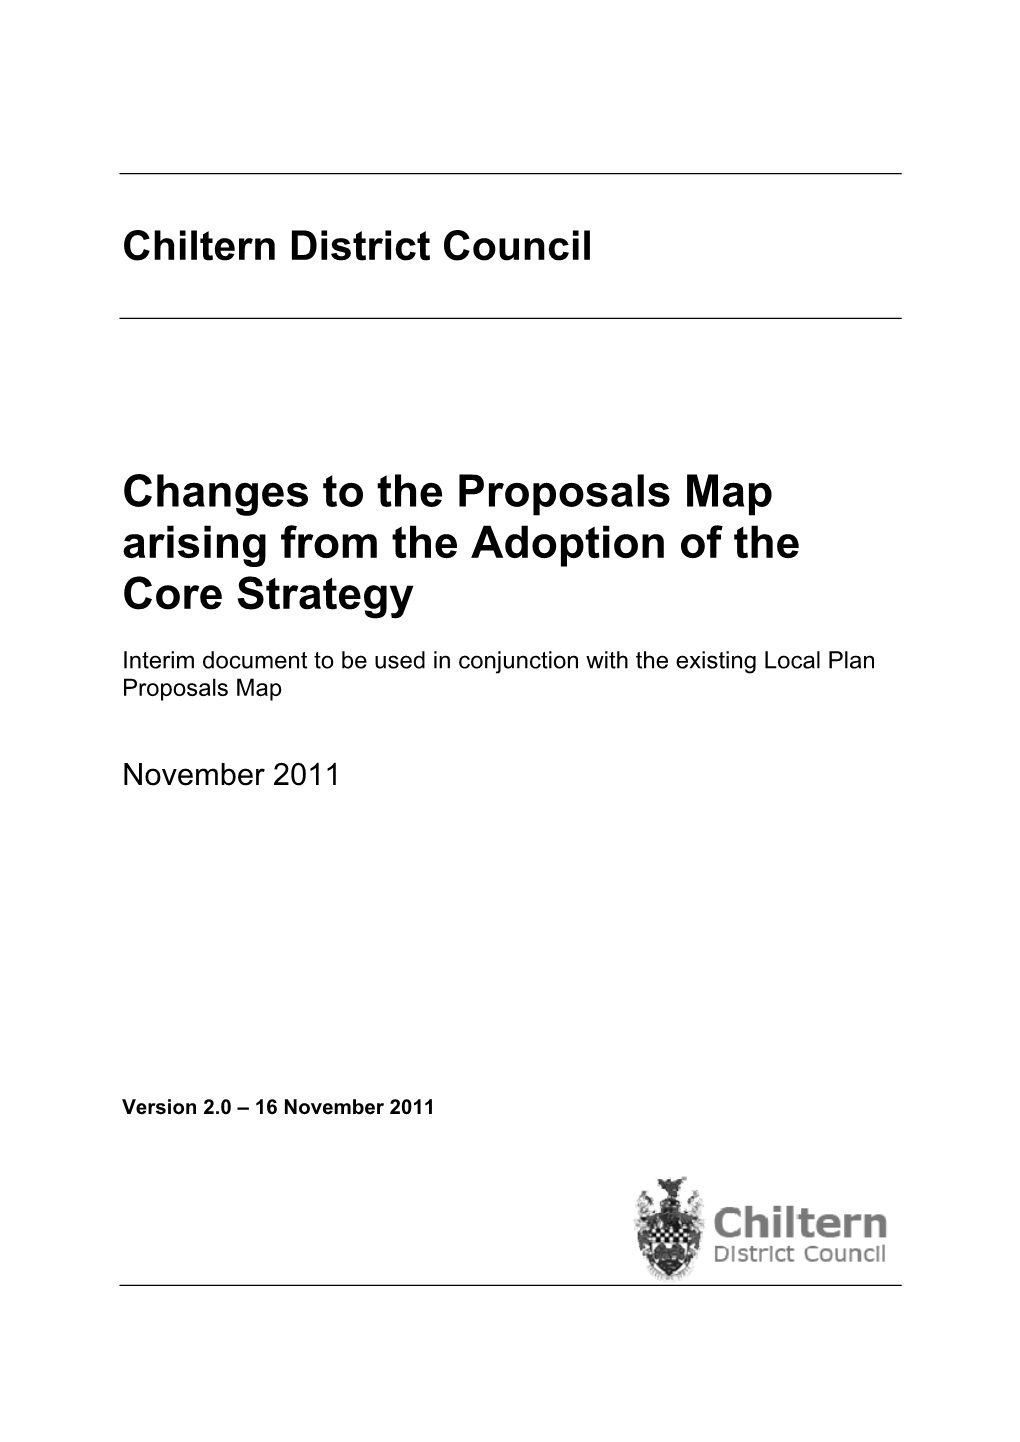 Changes to the Proposals Map Arising from the Adoption of the Core Strategy